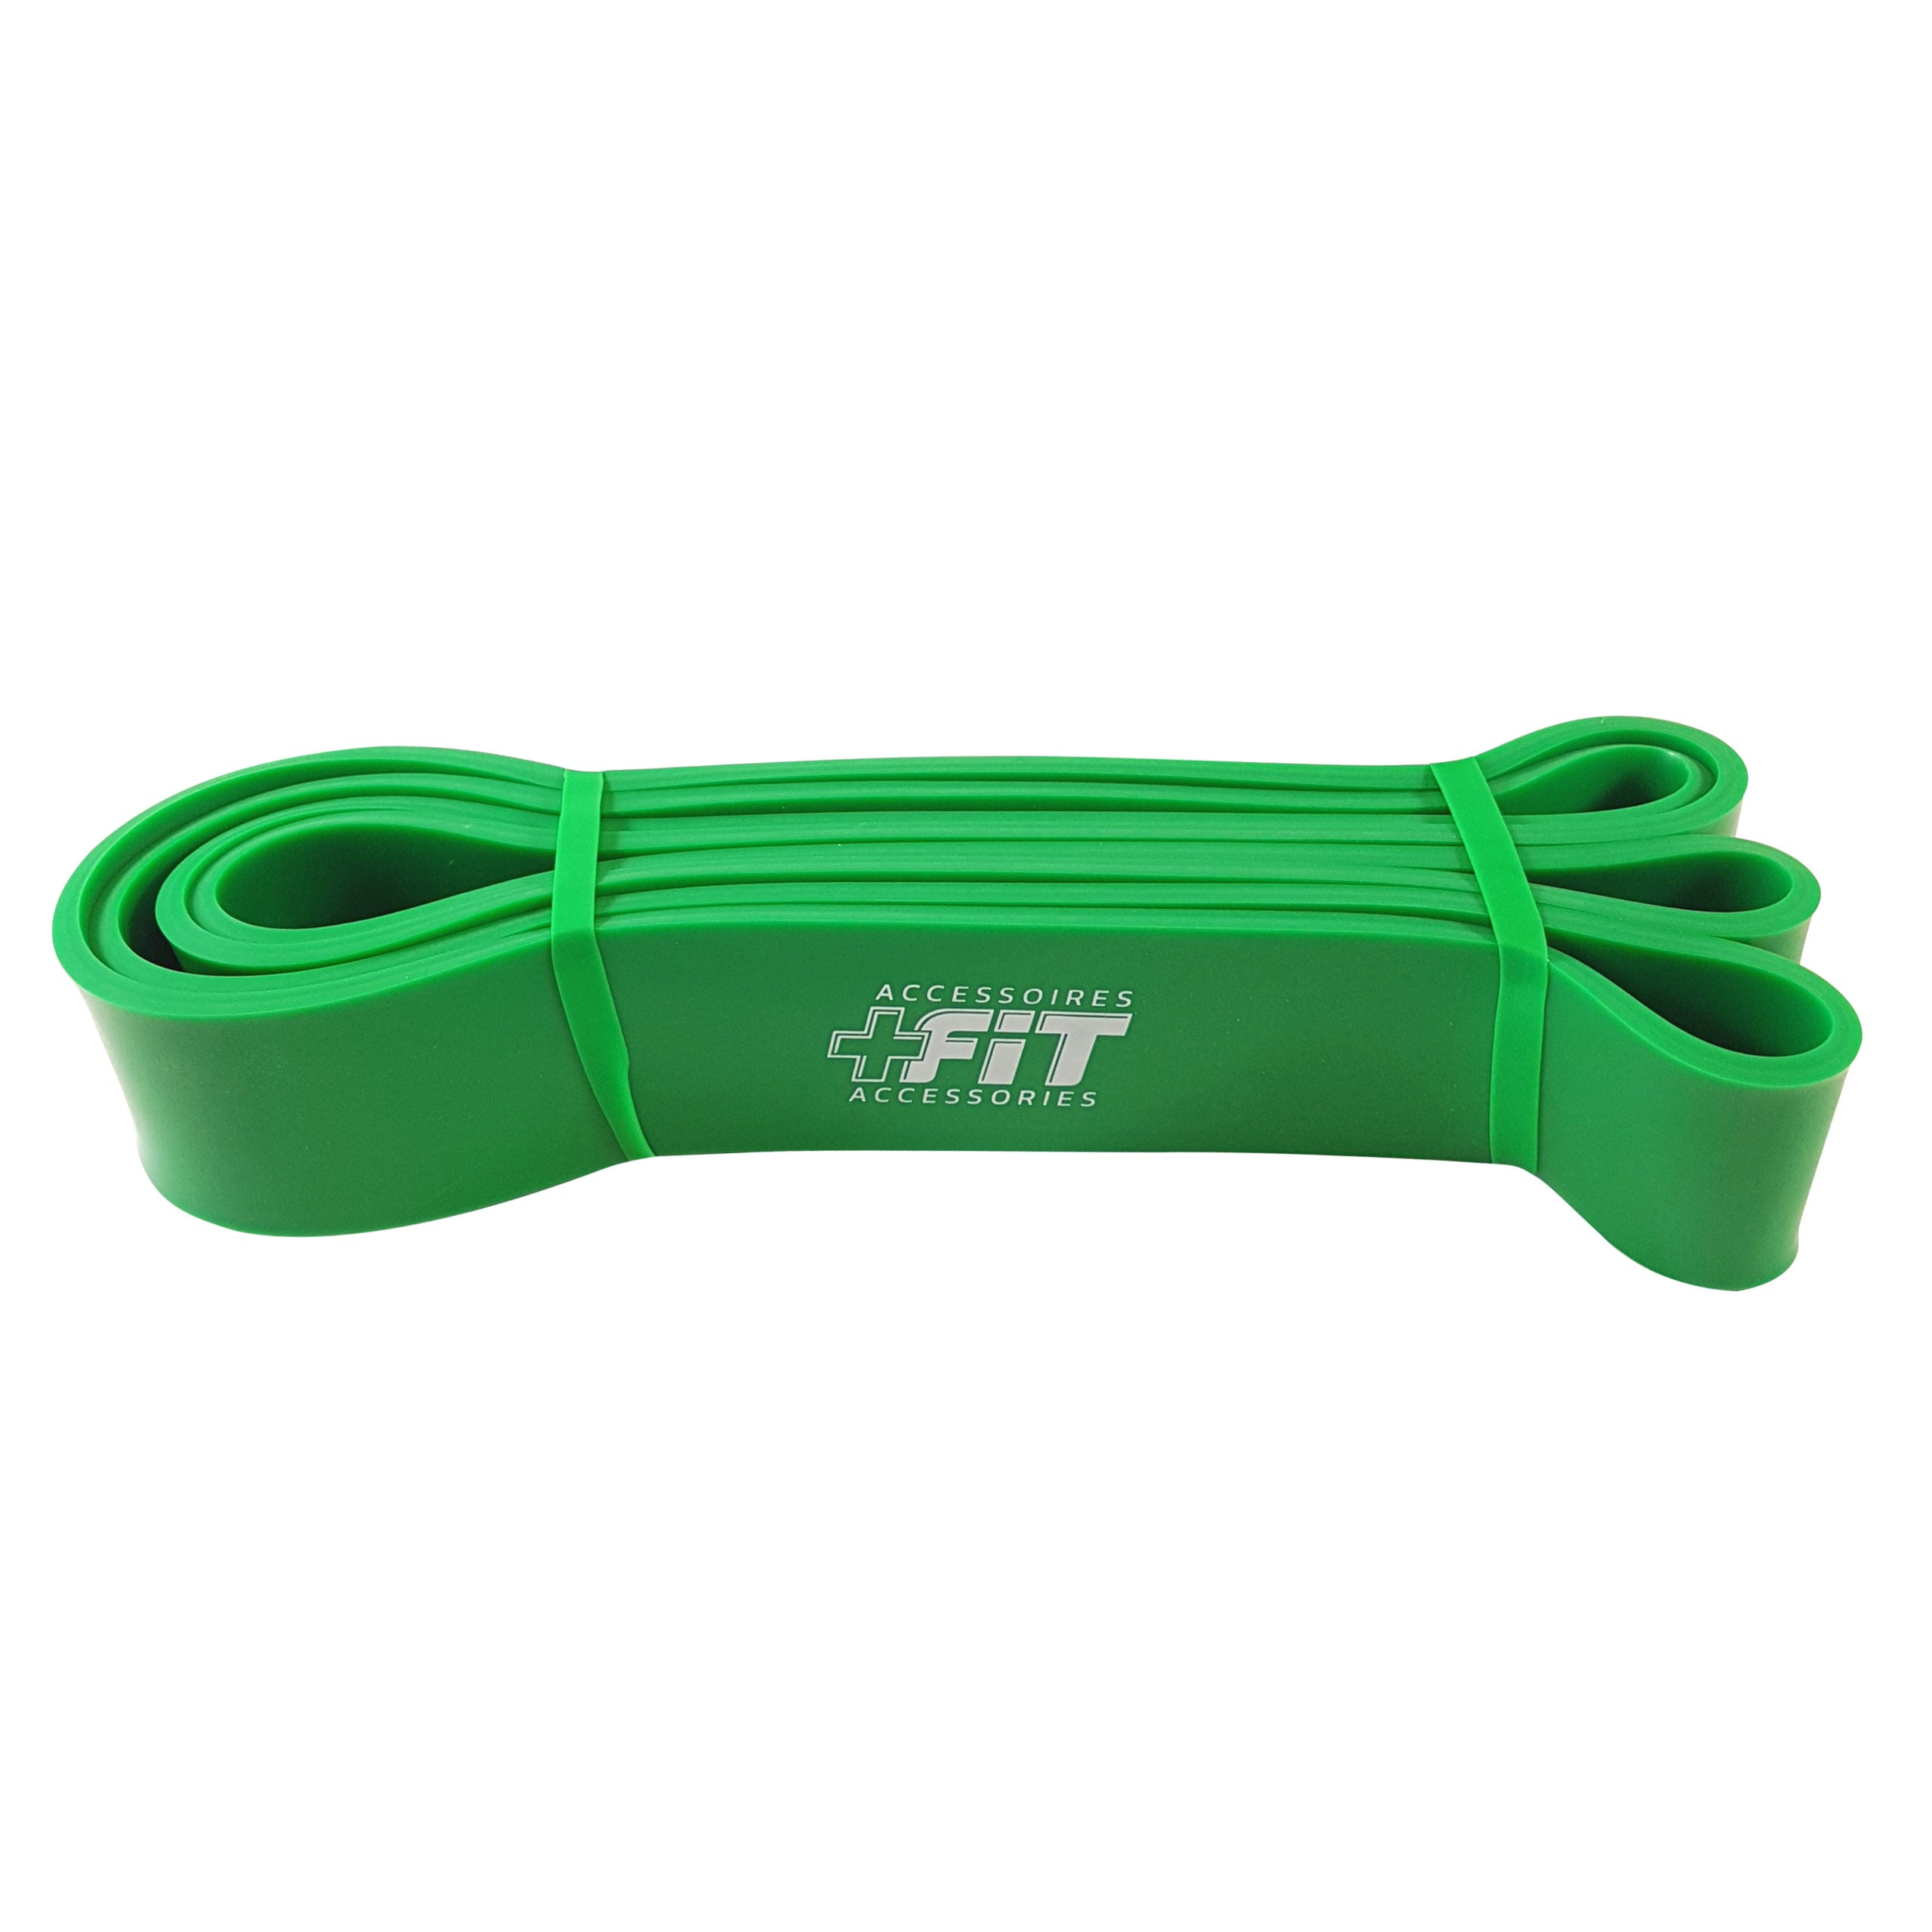 LONG LOOP RESISTANCE BANDS (1 Band) Fitness Accessories Green 50-120lbs (1 3/4") Top Nutrition and Fitness